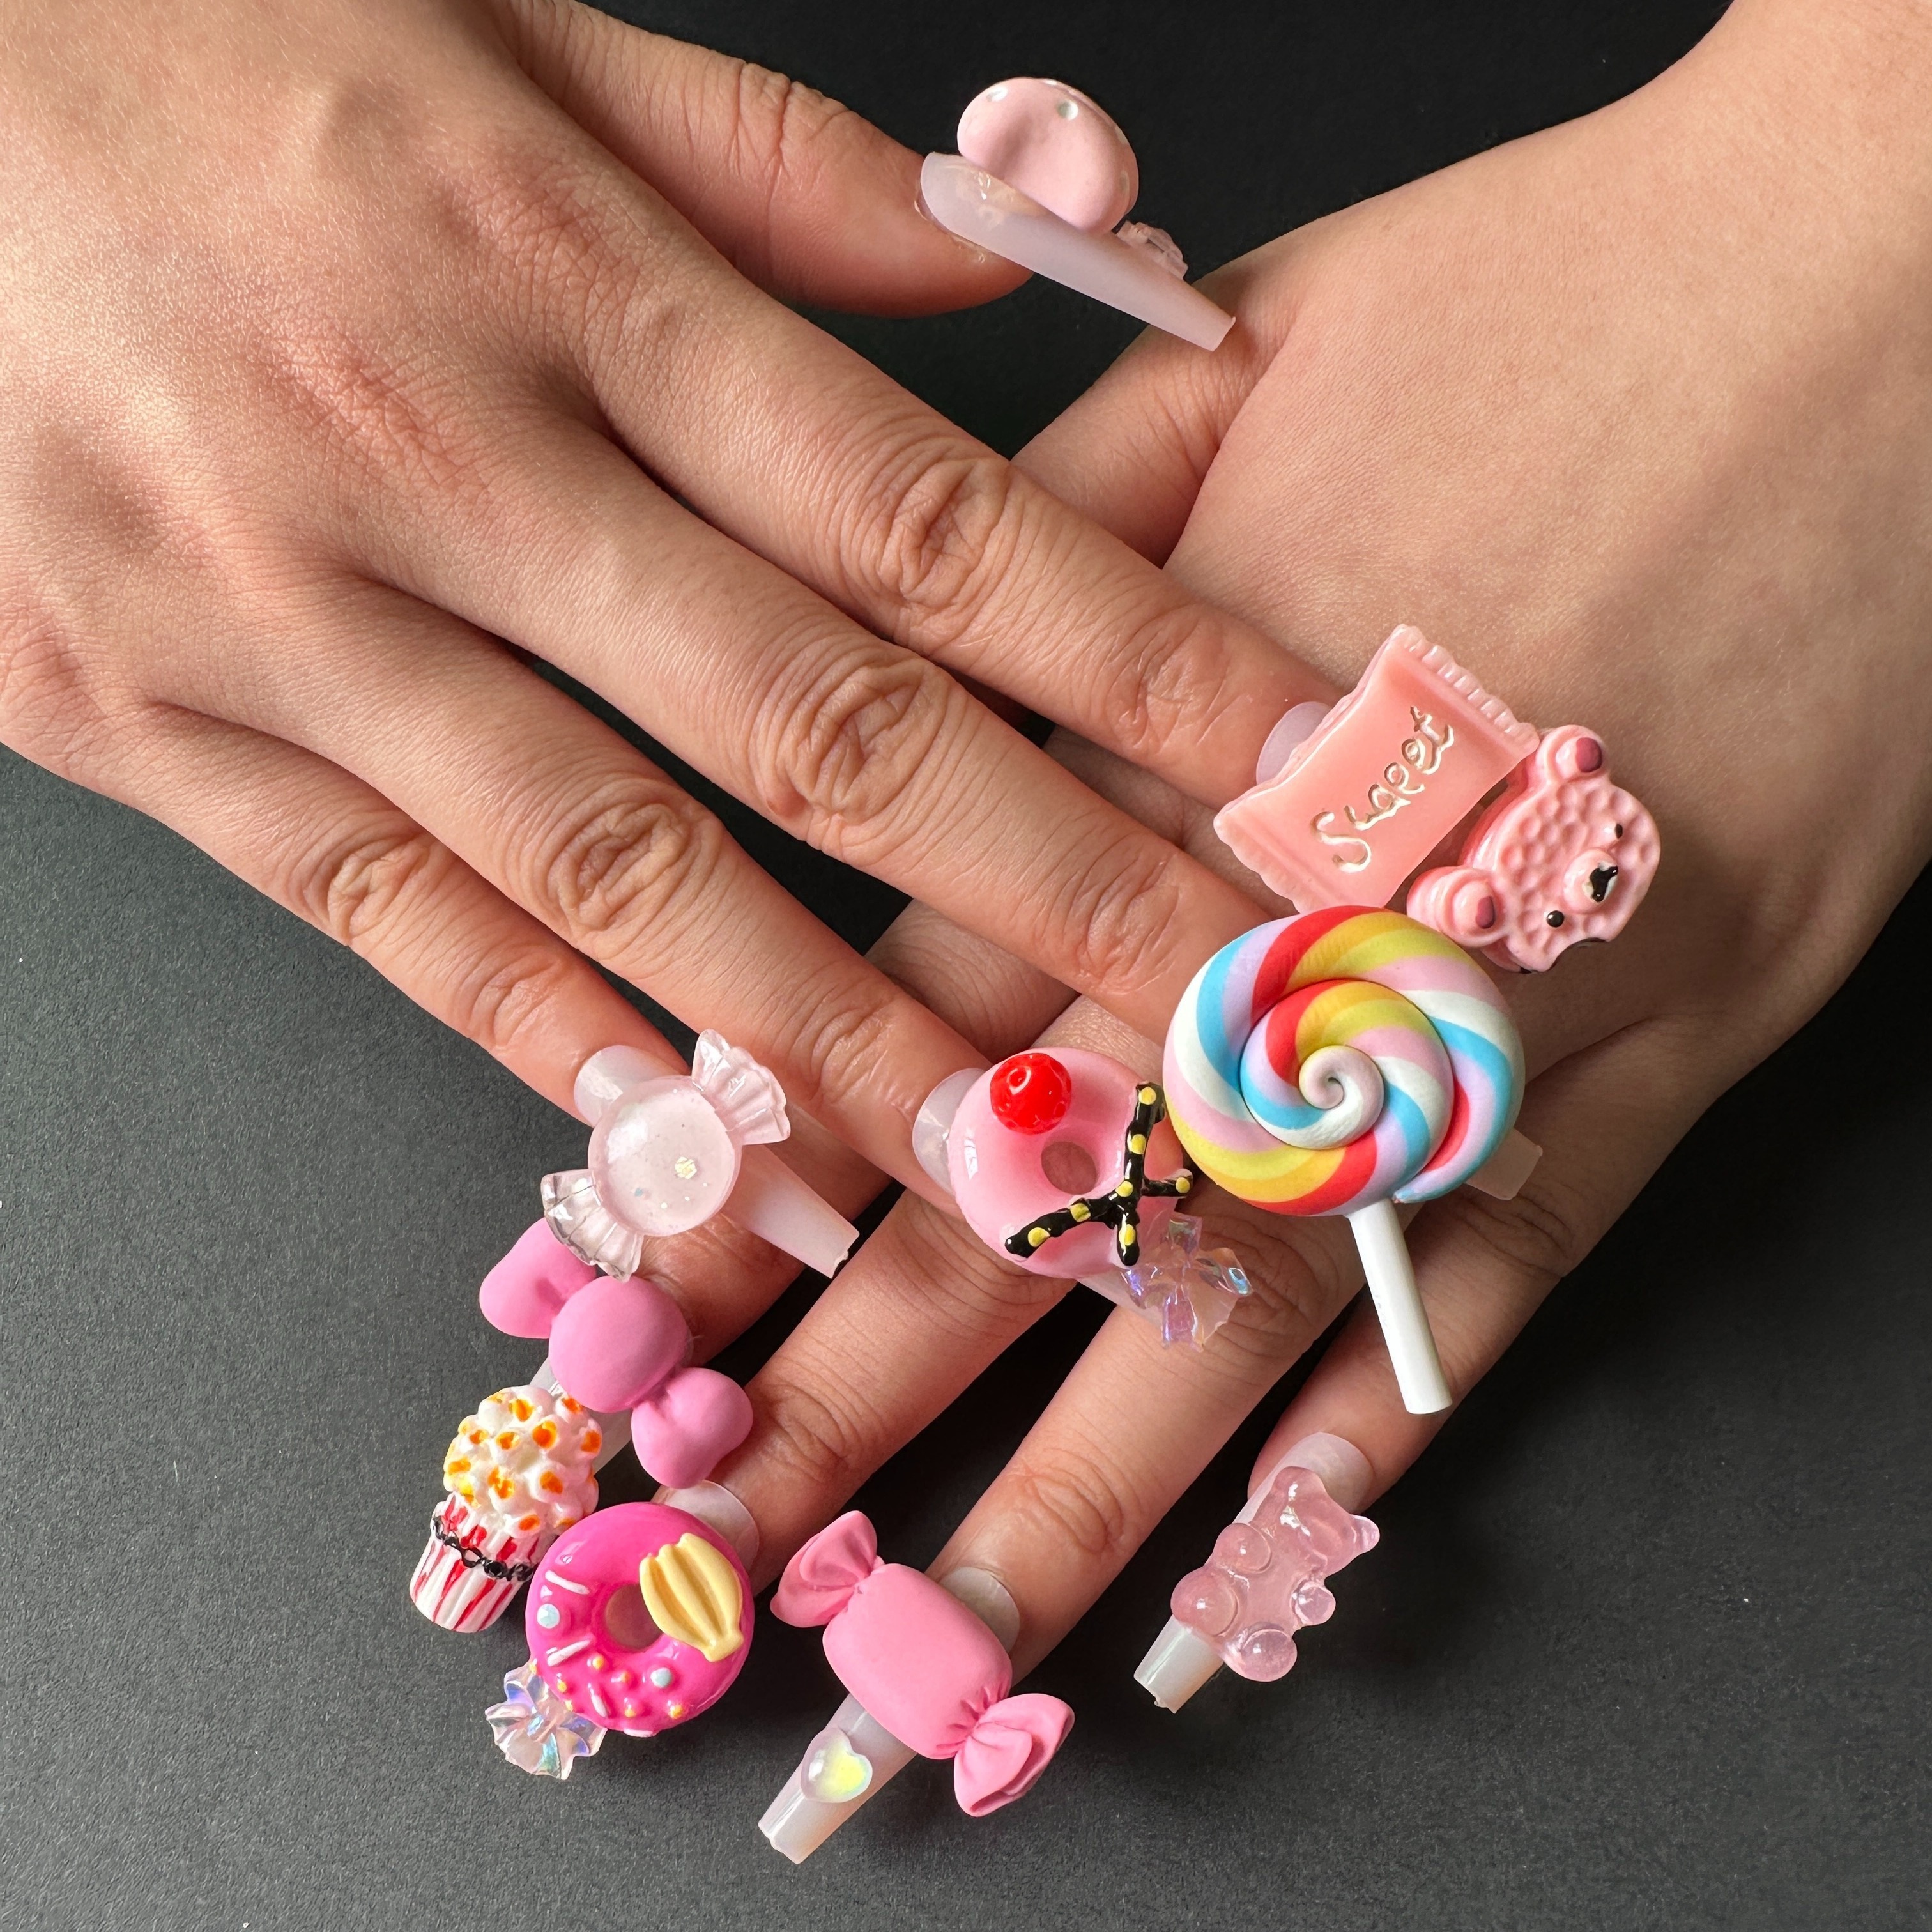 20PCS Cute Candy 3D Nail Charms Mix Lollipo Cabochon Bows/Bear /Flower  Japanese Style Resin Kawaii Nail Art Crafts Trendy DecalS